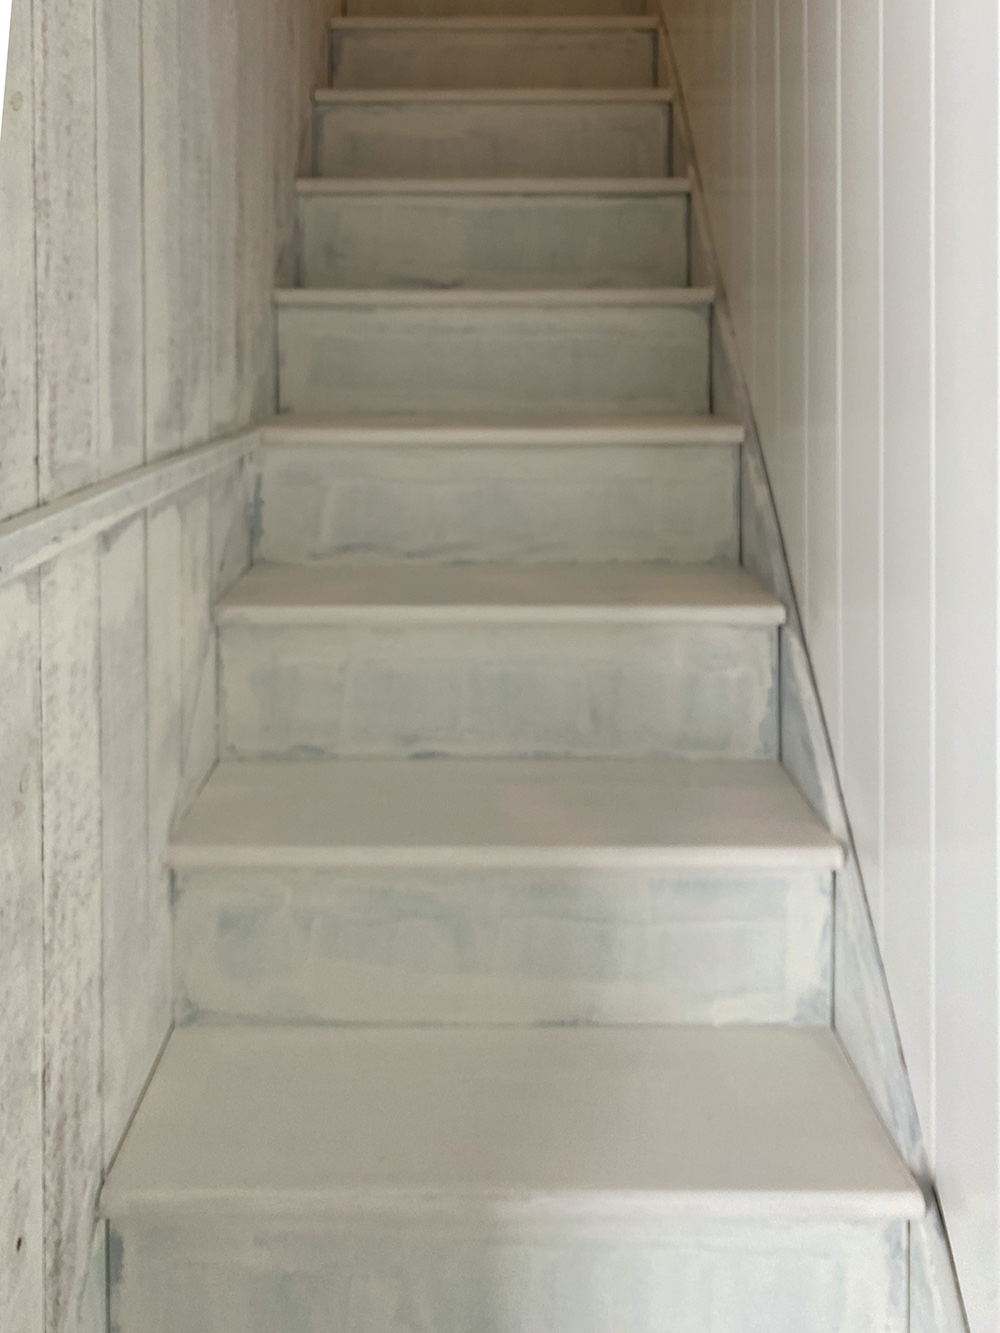 Staircase painted with white primer.